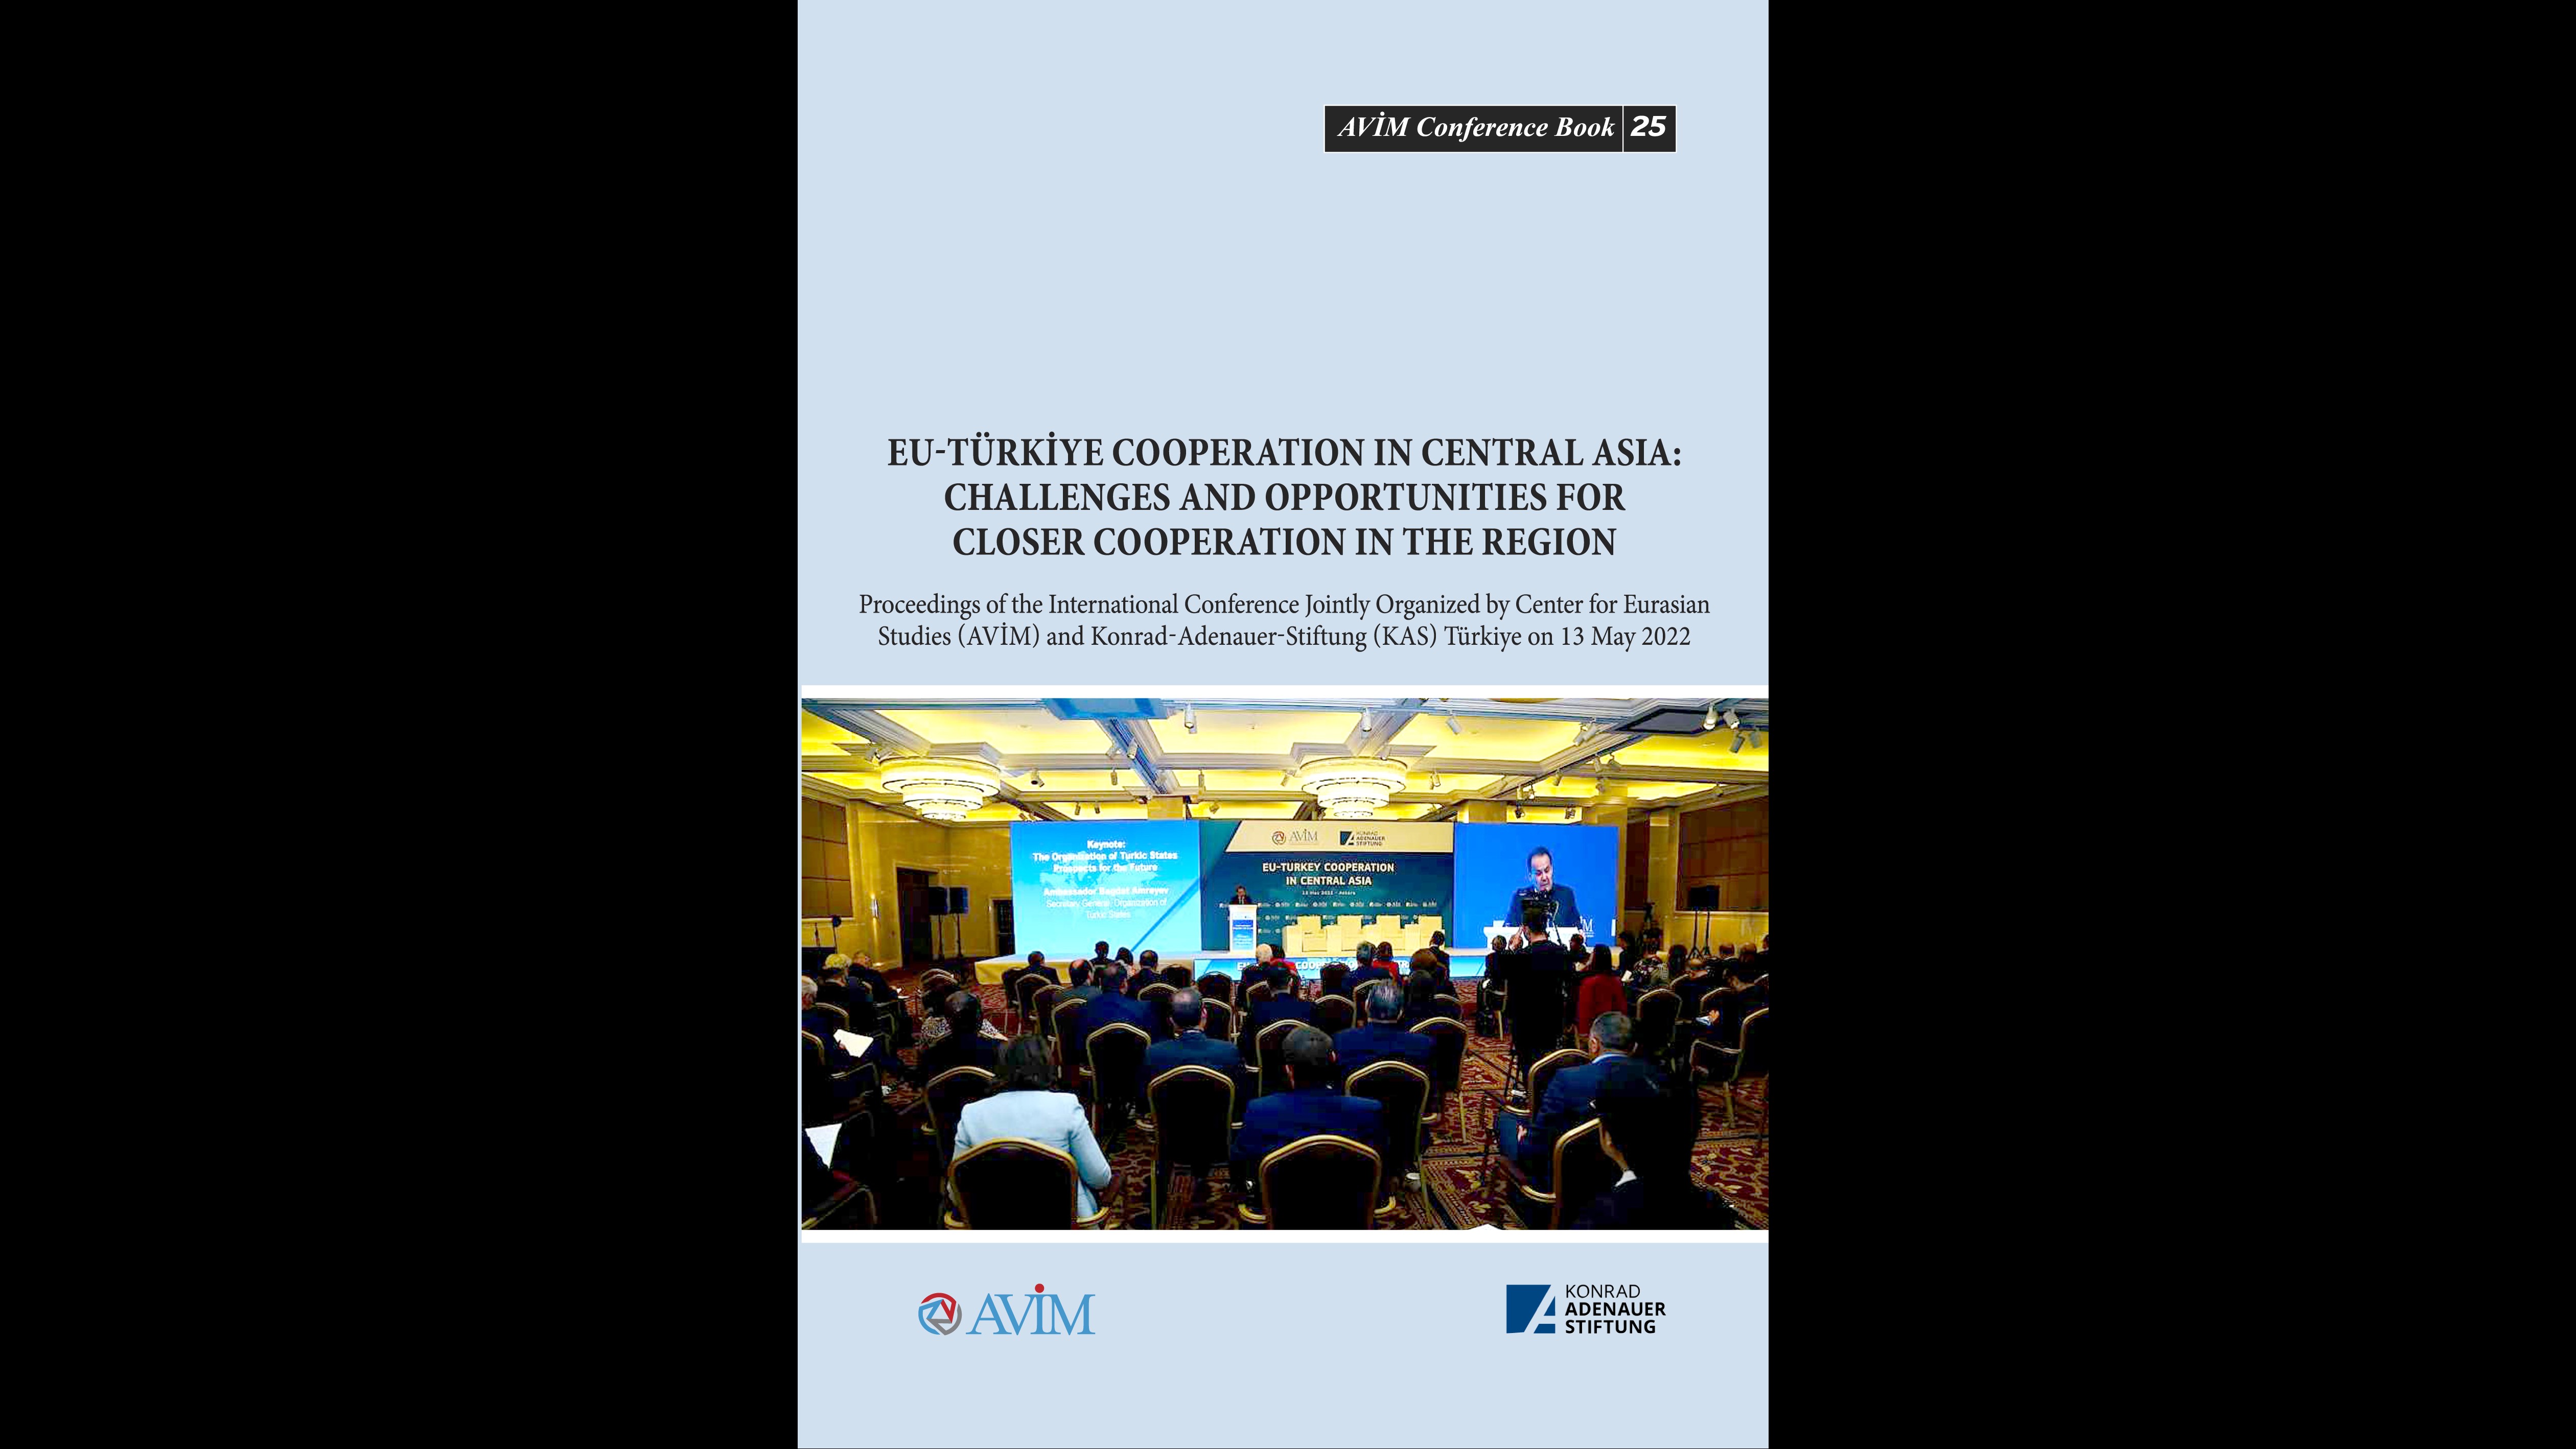 ANNOUNCEMENT: NEW PUBLICATION: PROCEEDINGS OF THE INTERNATIONAL CONFERENCE “EU-TÜRKİYE COOPERATION IN CENTRAL ASIA: CHALLENGES AND OPPORTUNITIES FOR CLOSER COOPERATION IN THE REGION”